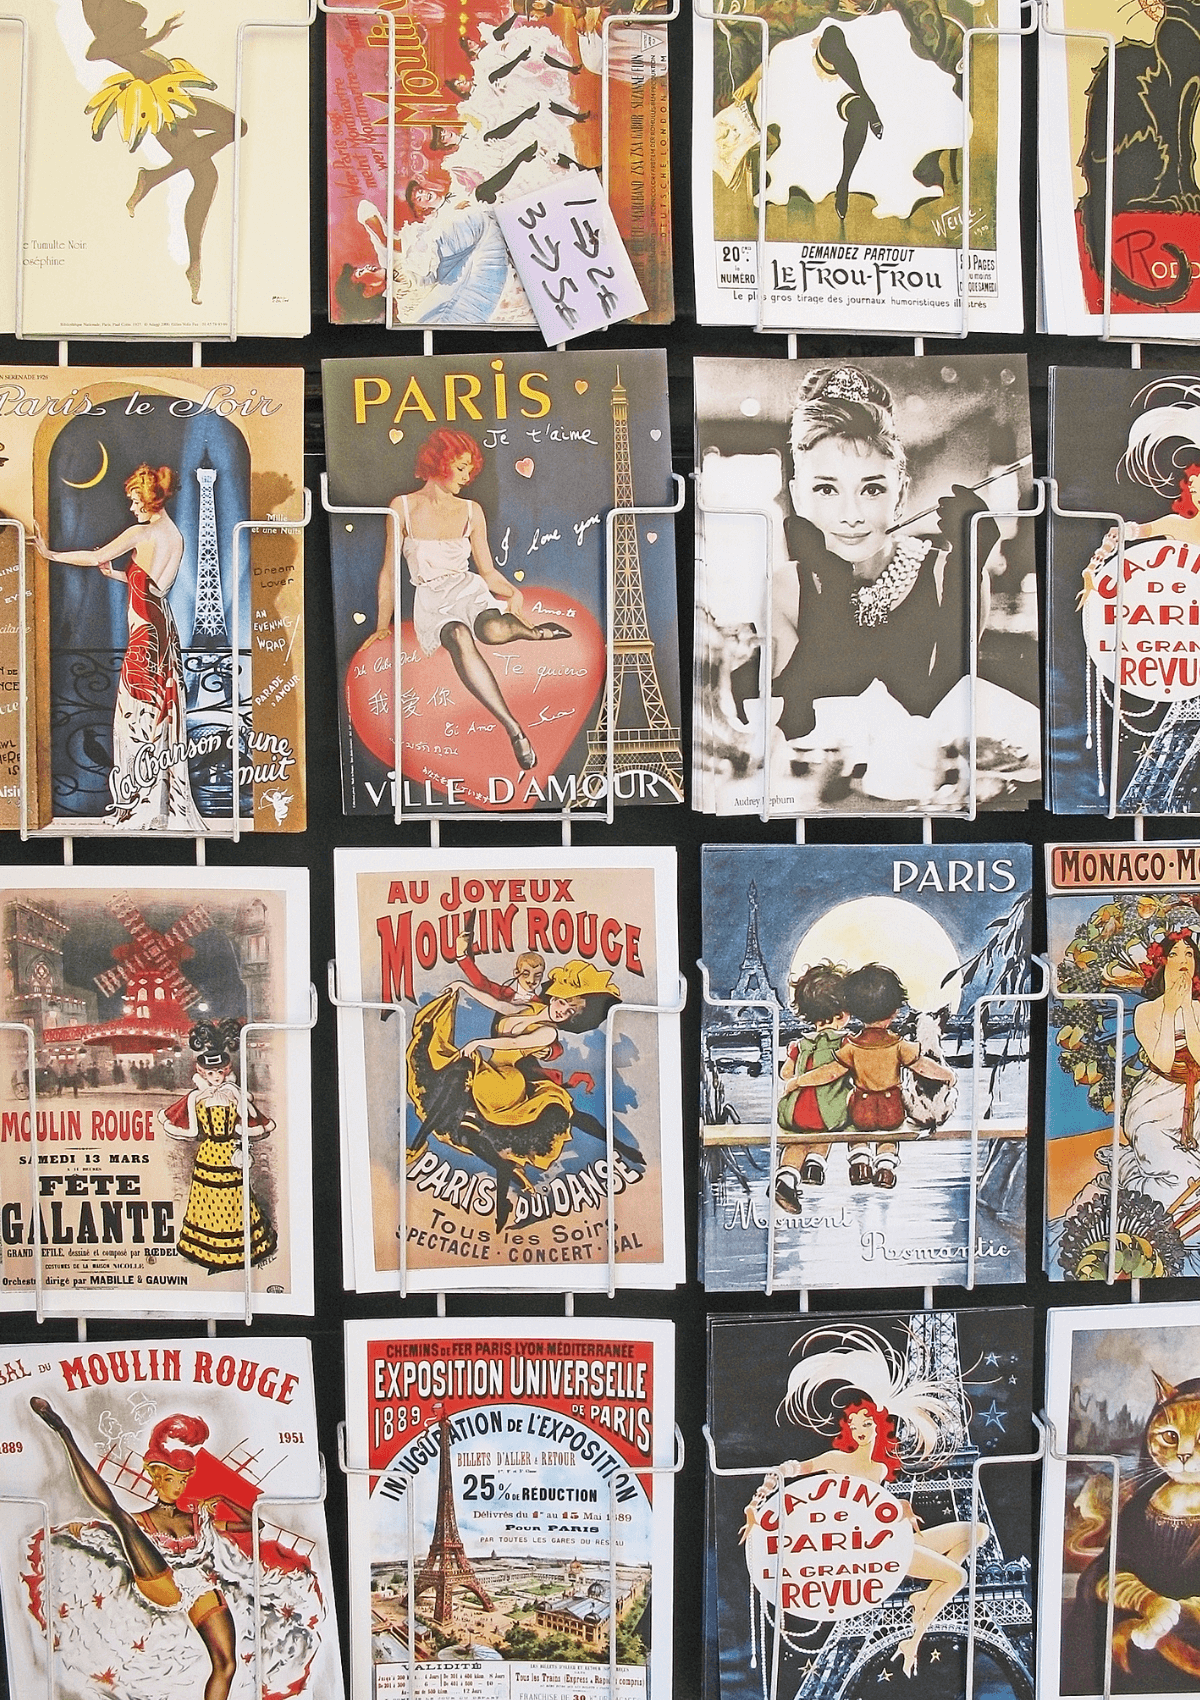 vintage posters from Paris are great keepsakes